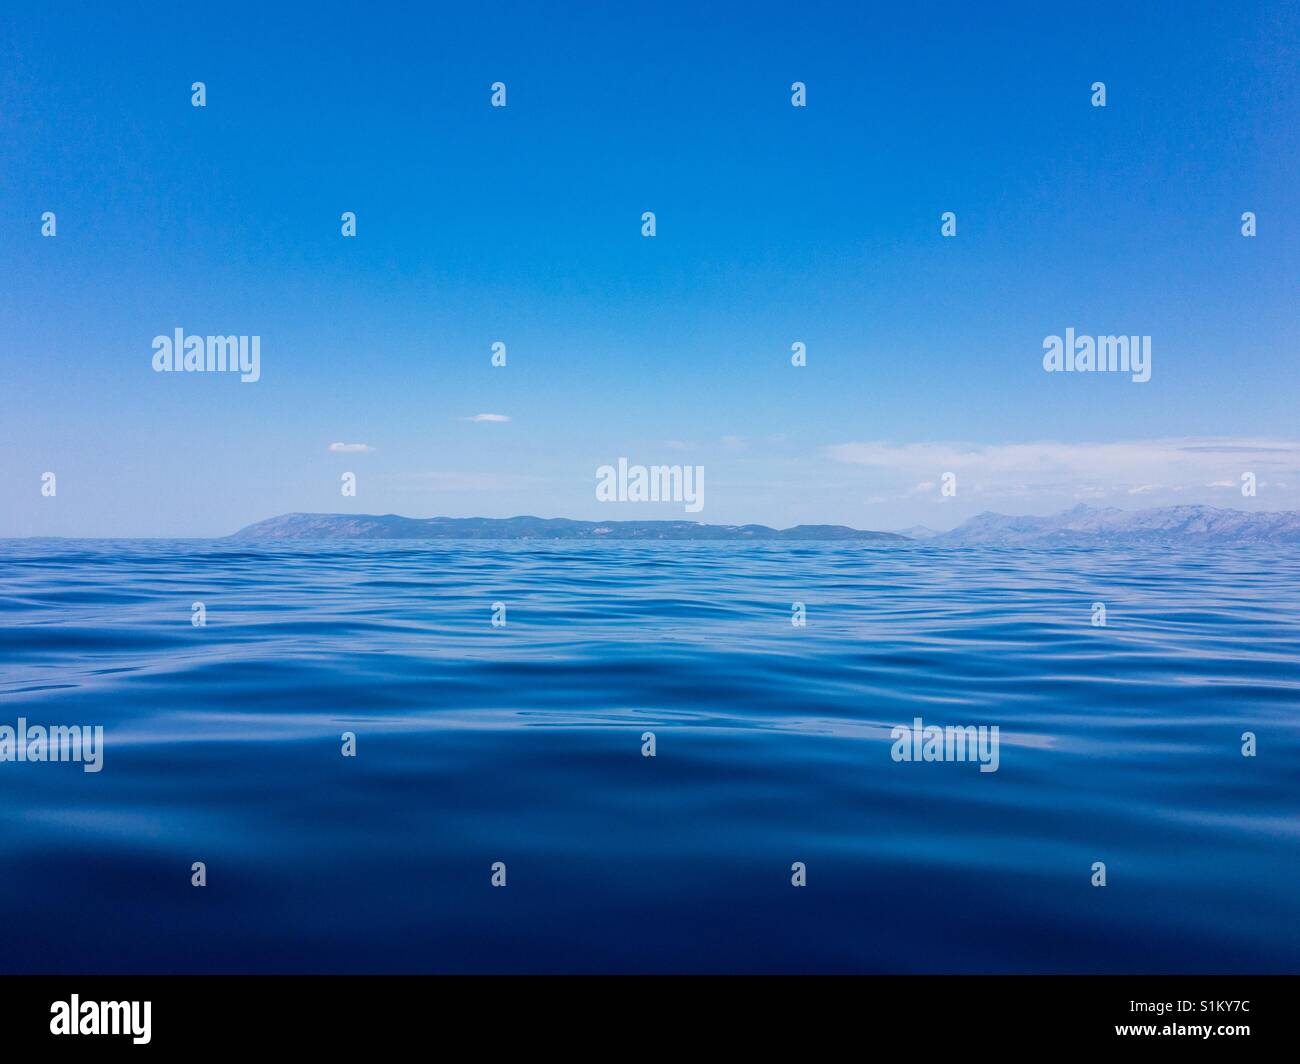 Empty blue sea and island at background Stock Photo